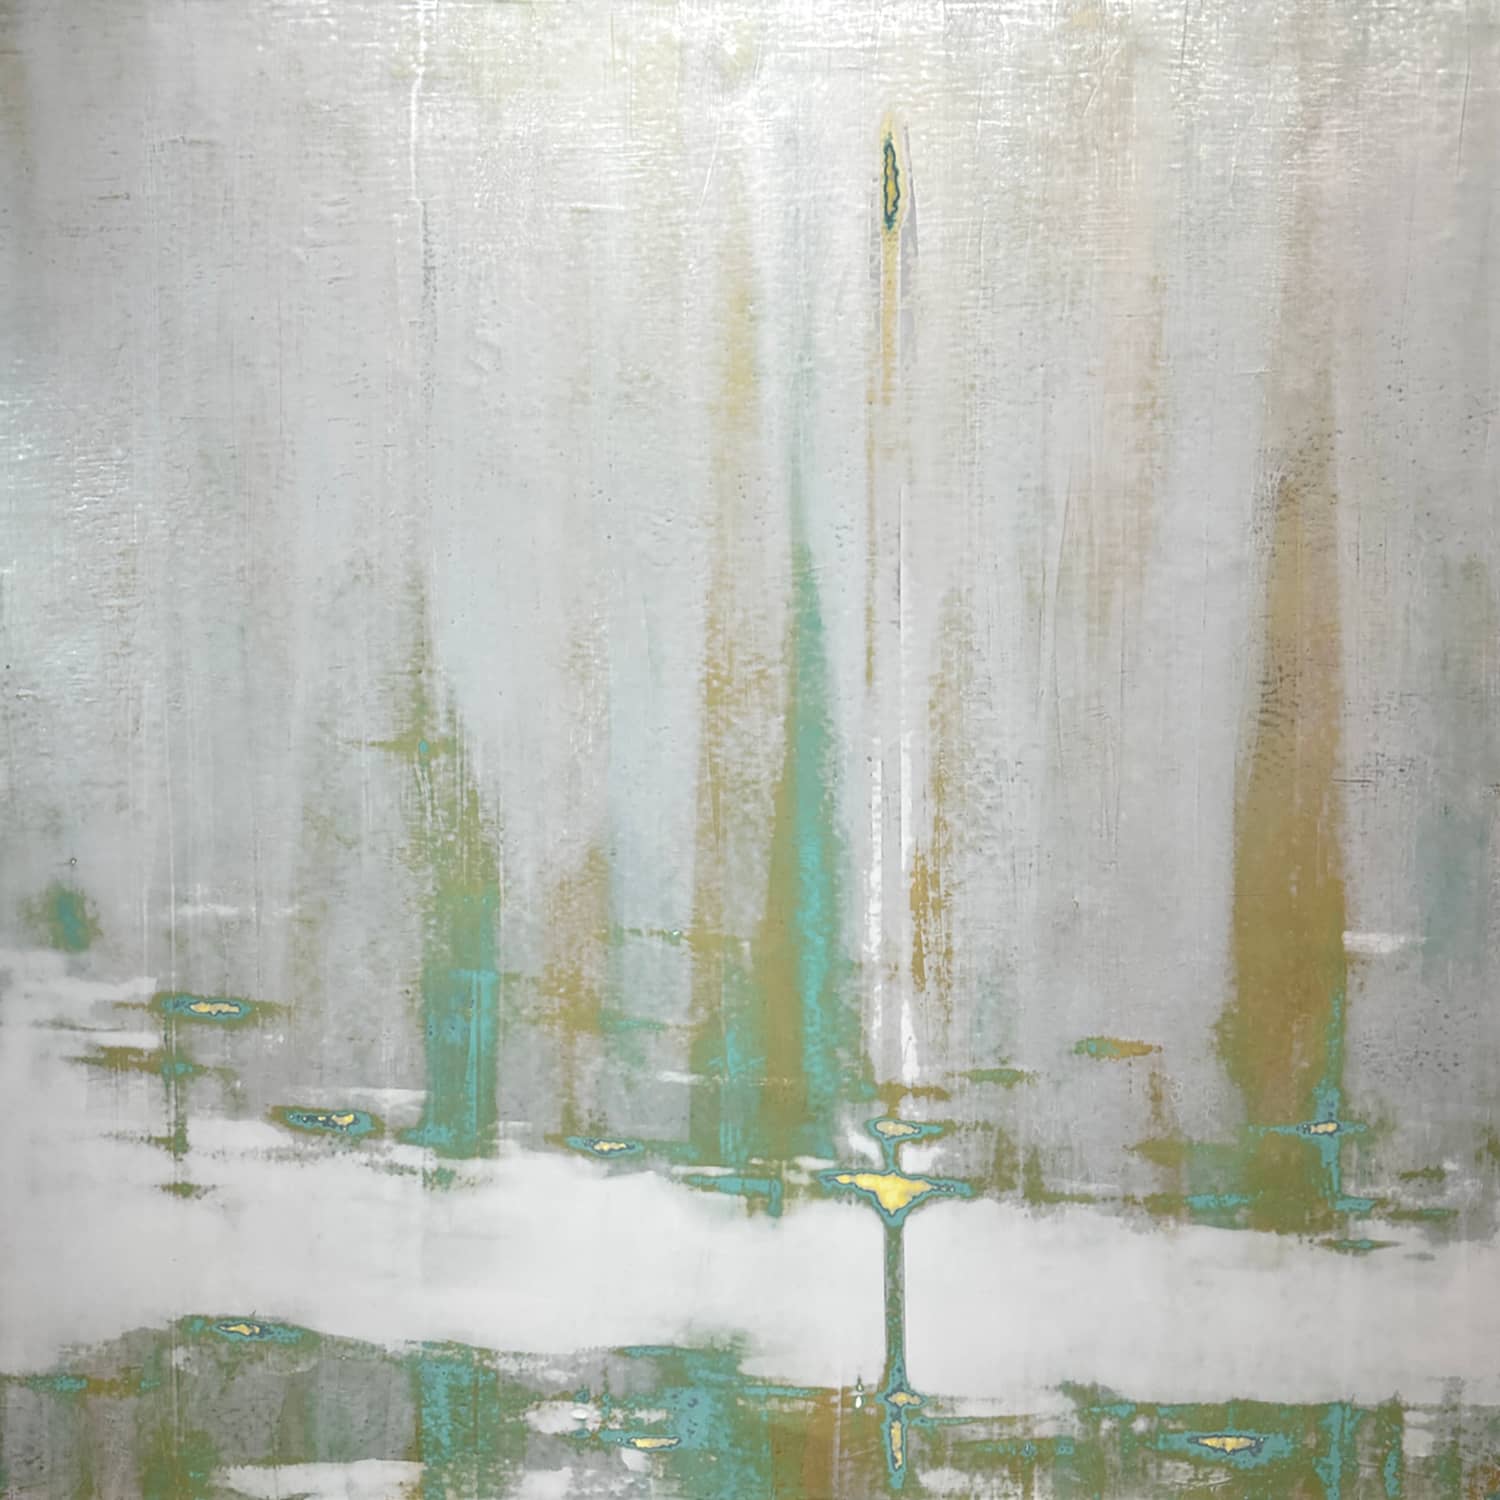 Somewhere Silver I_Audra Weaser_Acrylic, Plaster Paint, Metallic pigments on Canvas_48 x 48